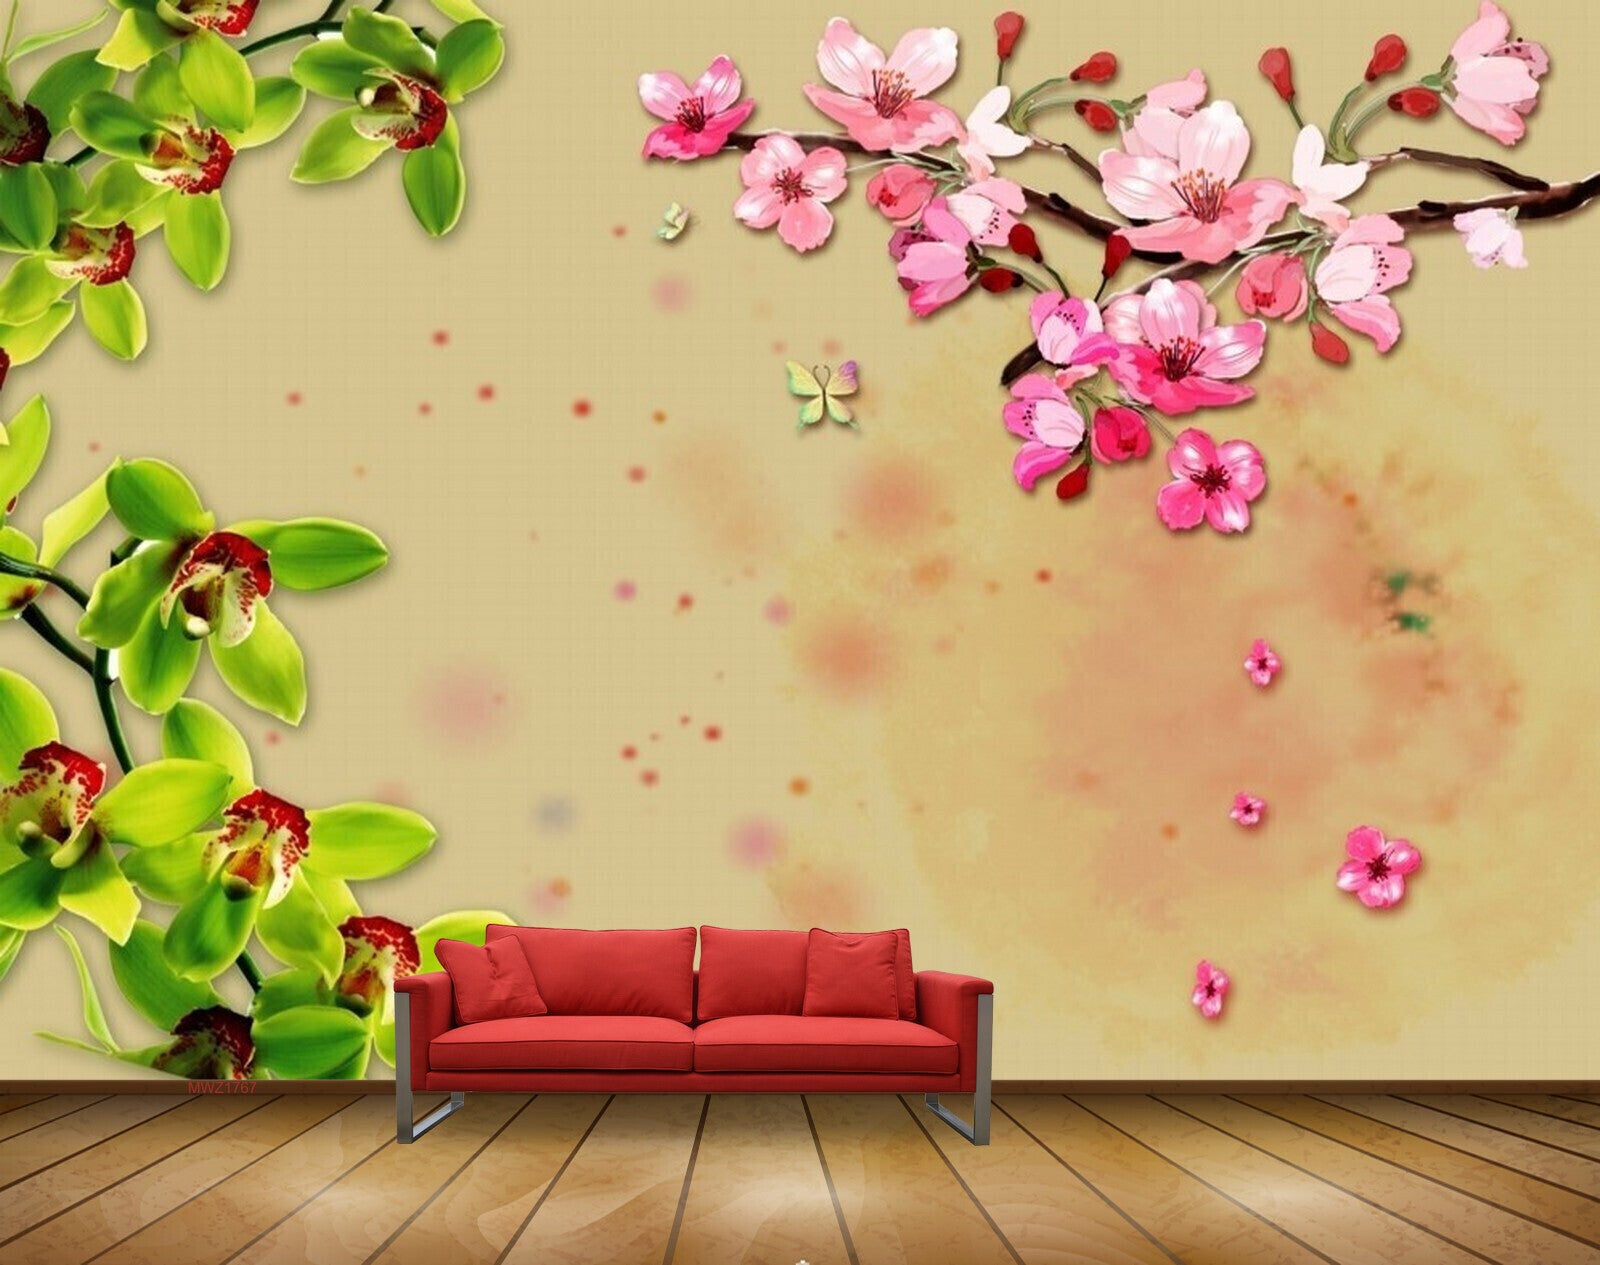 3d Flower Wallpaper Stock Photos Images and Backgrounds for Free Download